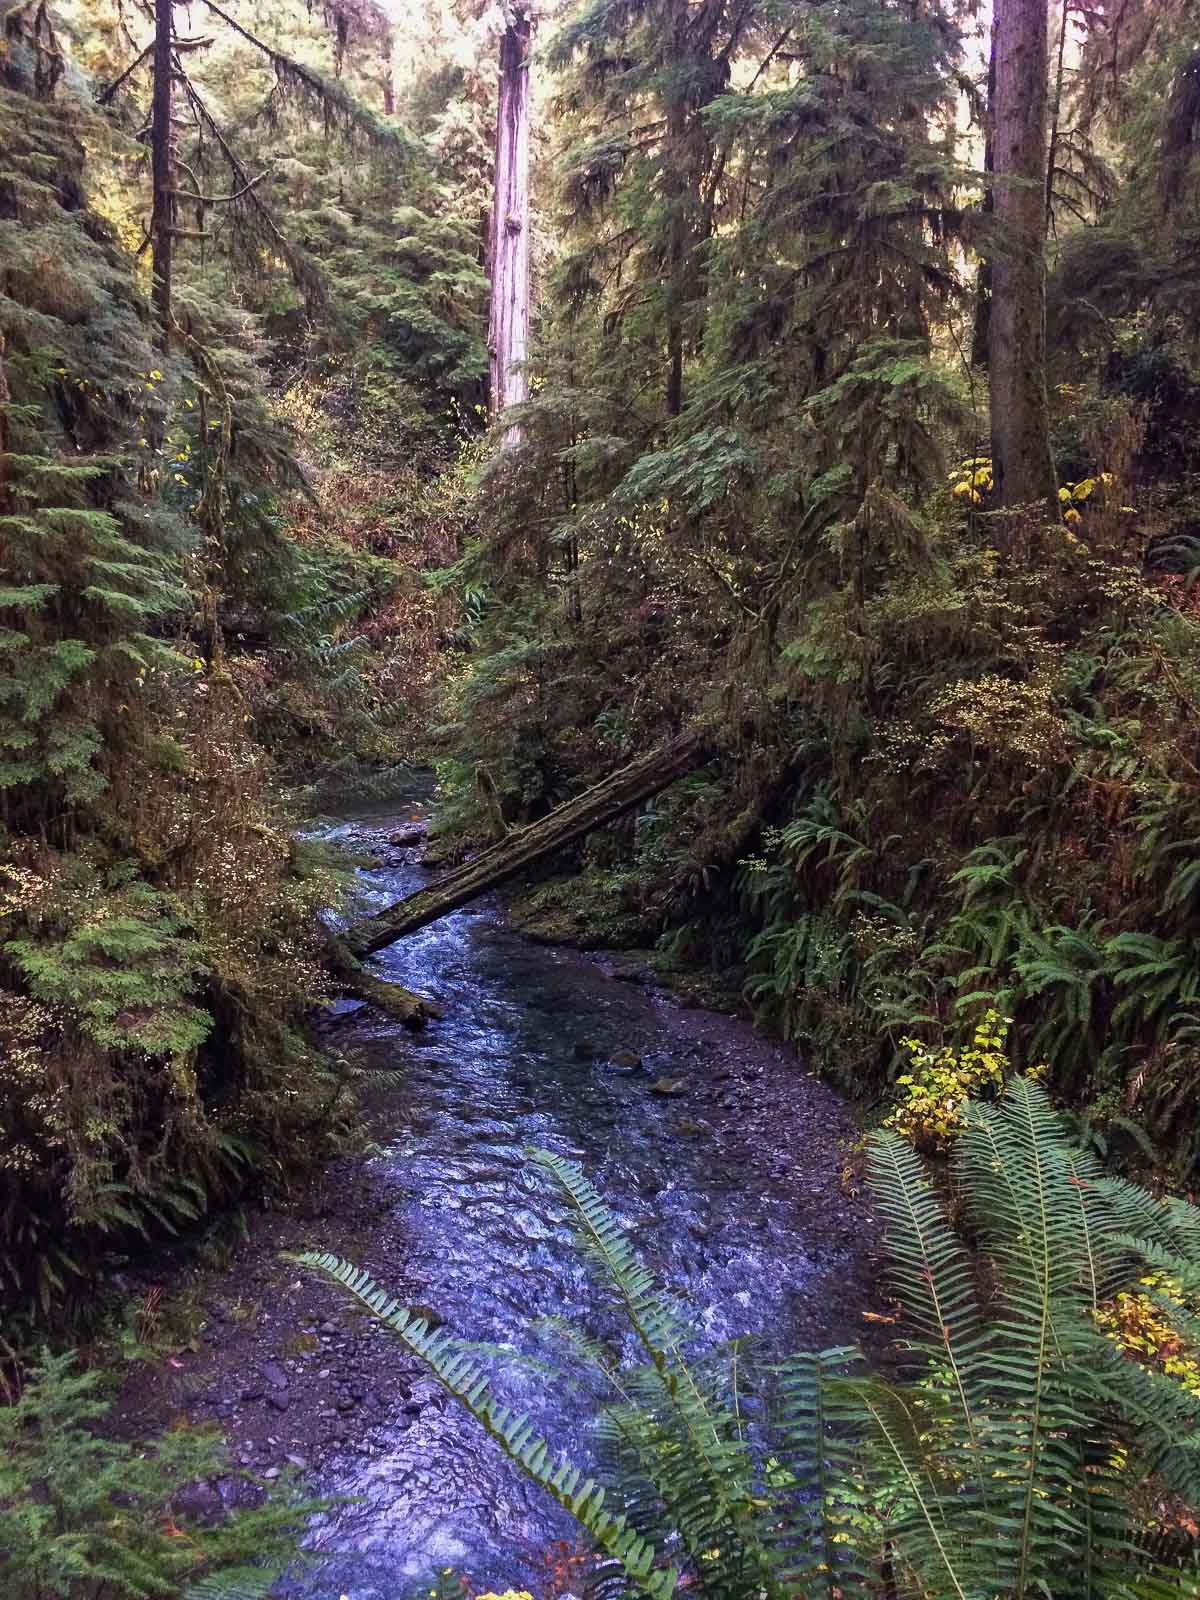 Quinault Rain Forest scenery in Olympic National Forest, Washington